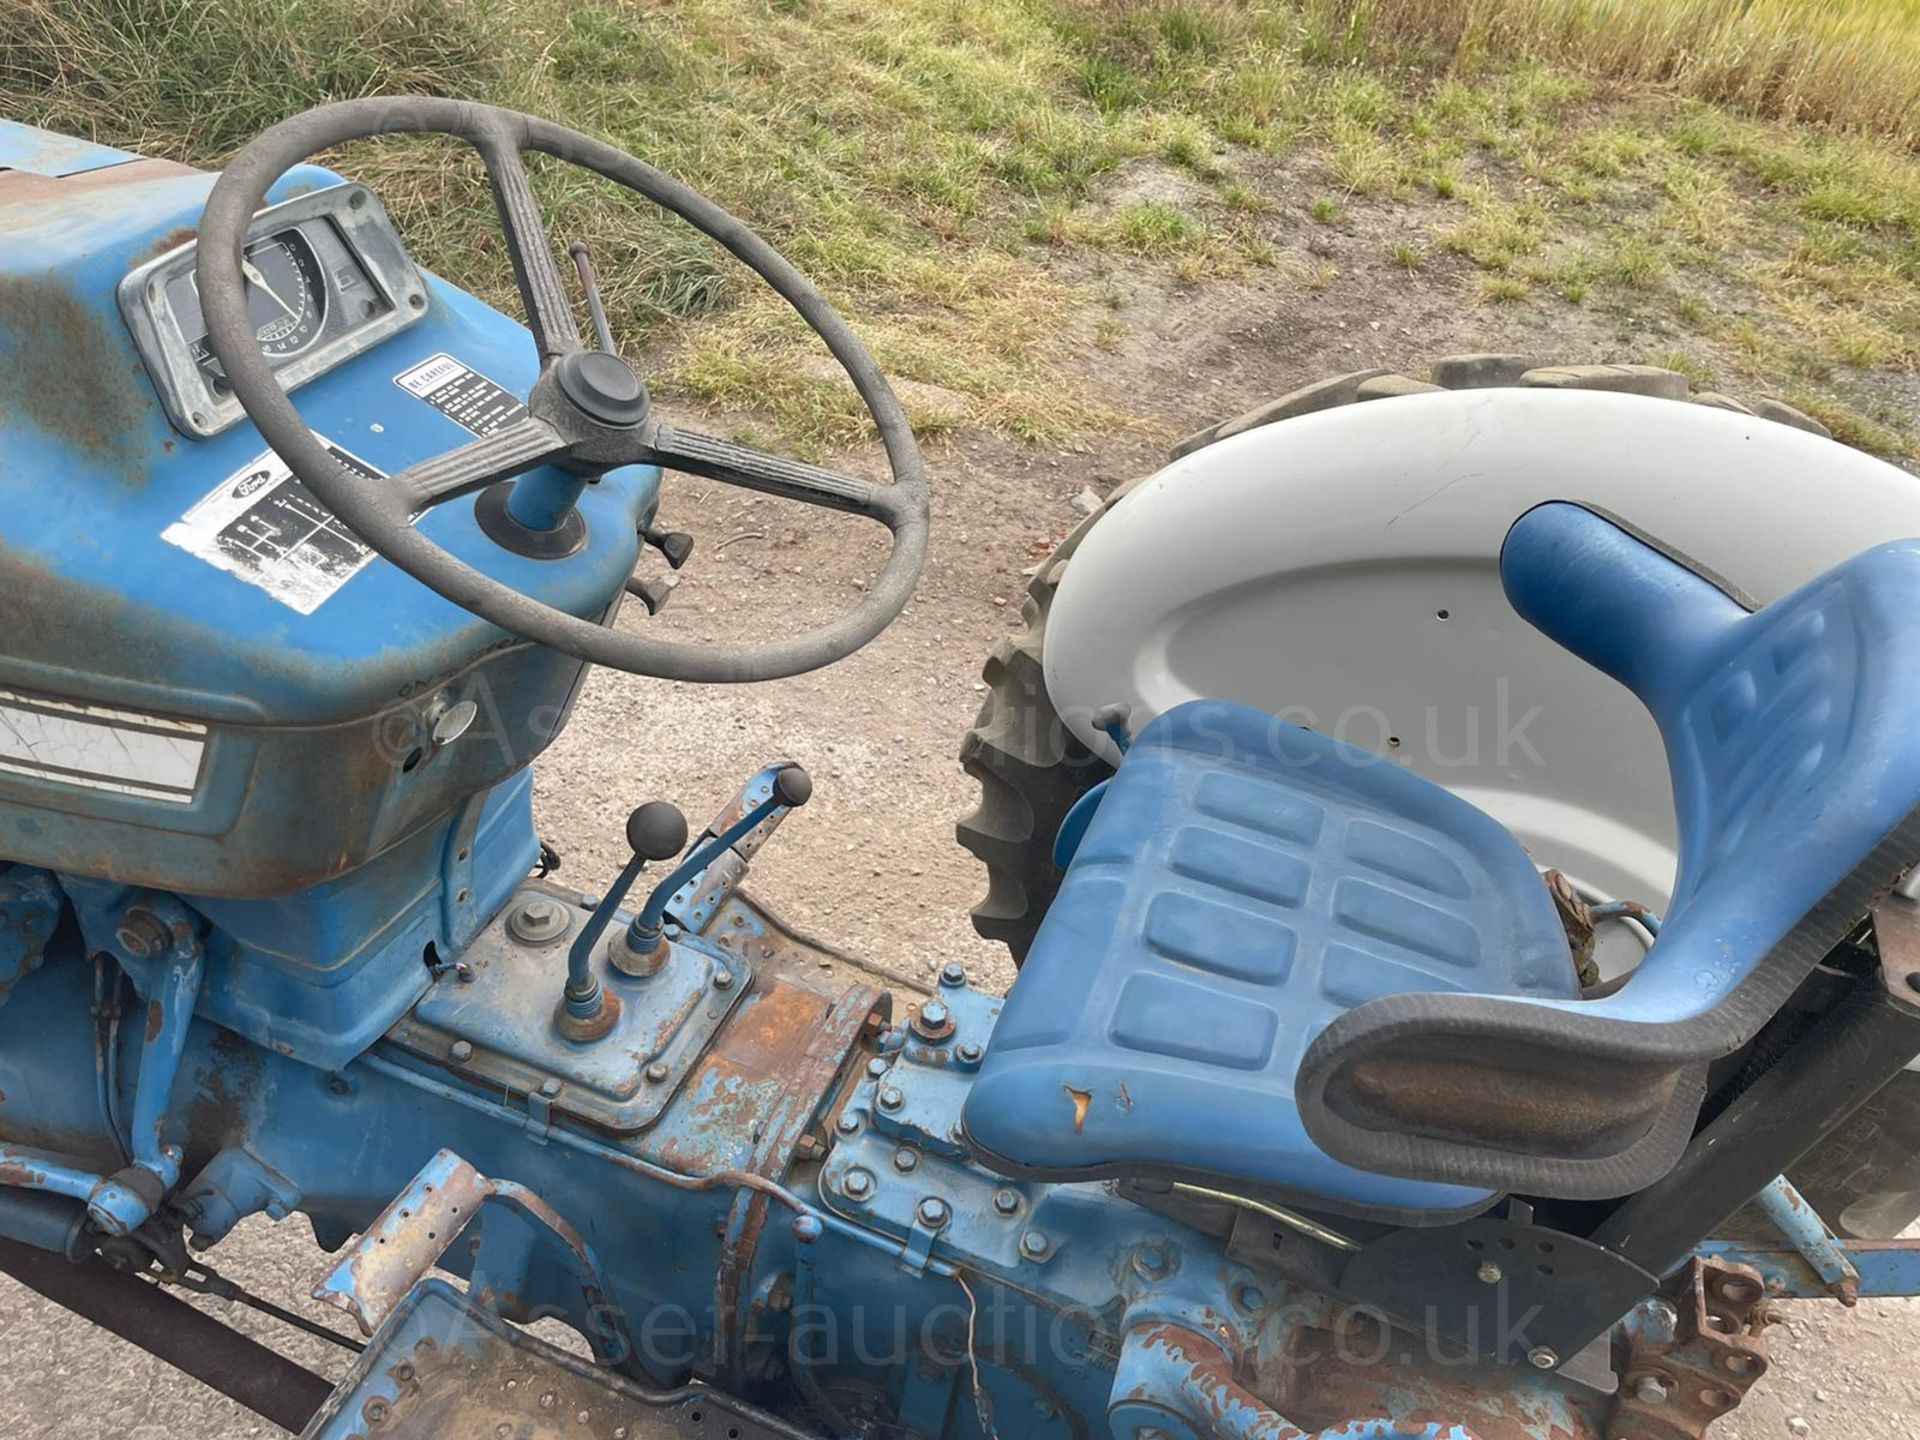 FORD 3000 PETROL VINTAGE TRACTOR, RUNS AND DRIVES, SHOWING 2882 HOURS, ALL GEARS WORK *PLUS VAT* - Image 7 of 7